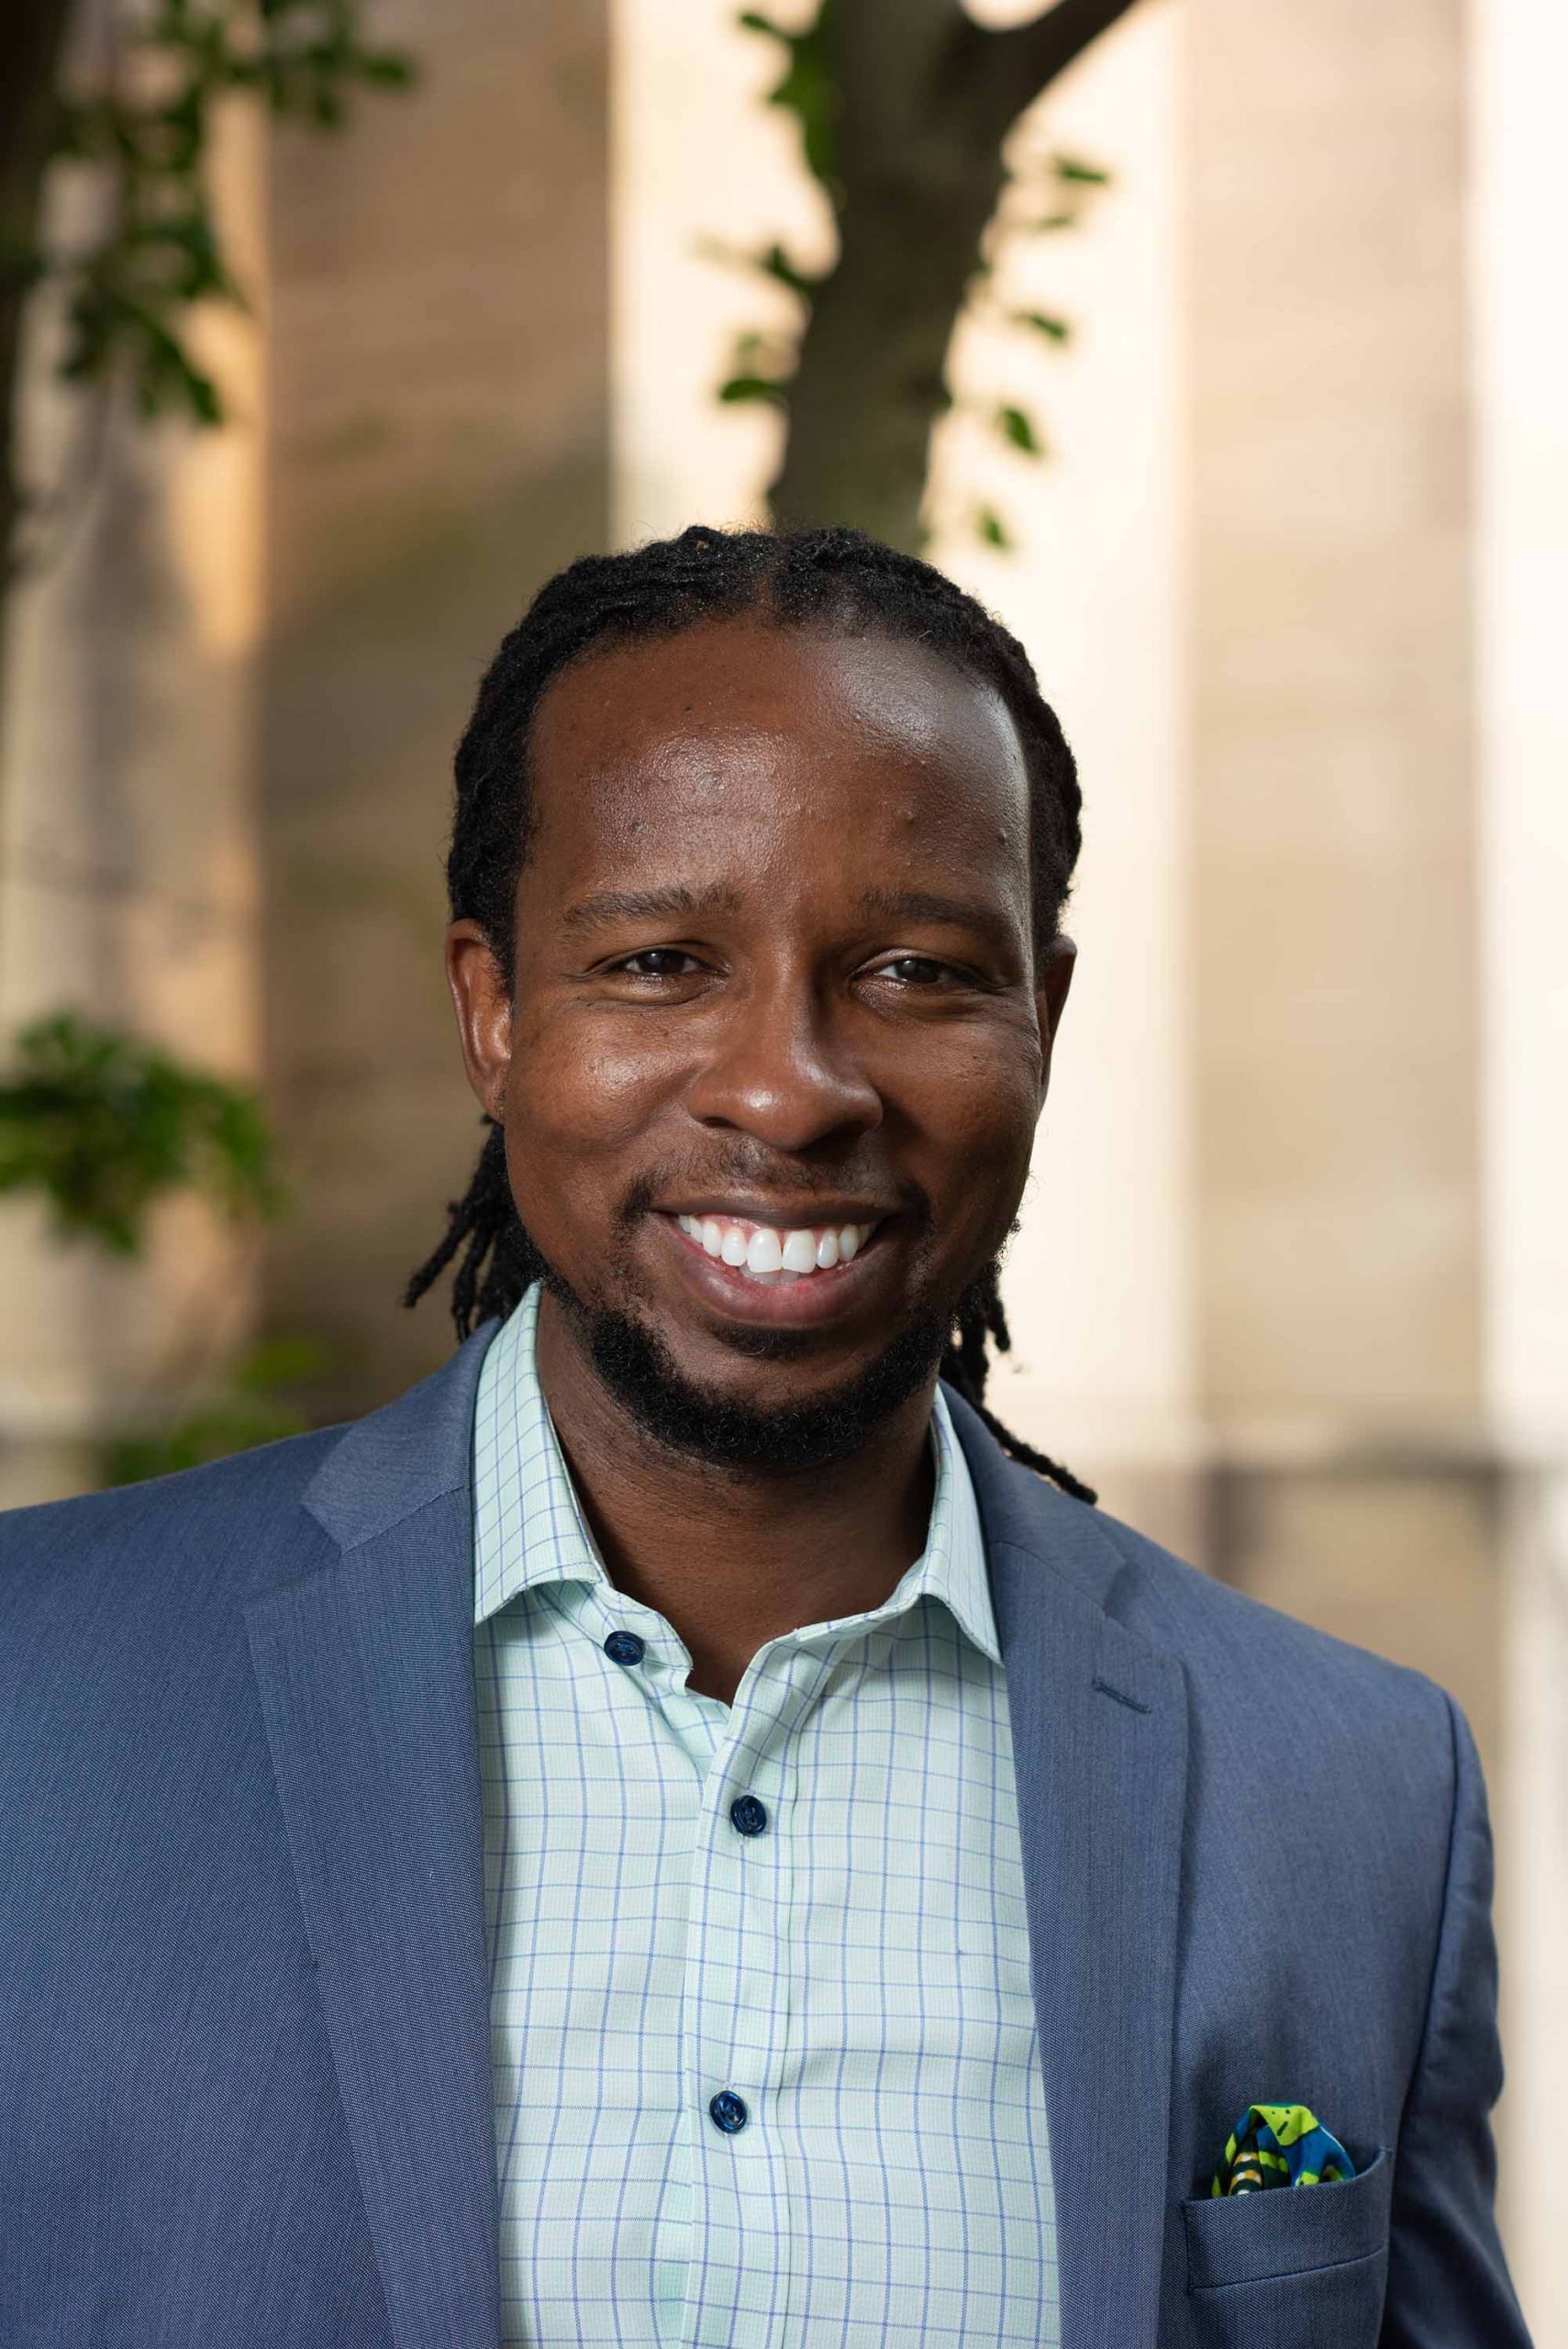 Photo of Ibram X. Kendi smiling. He has shoulder length locs that are pulled back, and he wears a blue suit, colorful pocket square, and light blue button up shirt. The portrait was taken outside, a building and a tree are blurred in the distance.